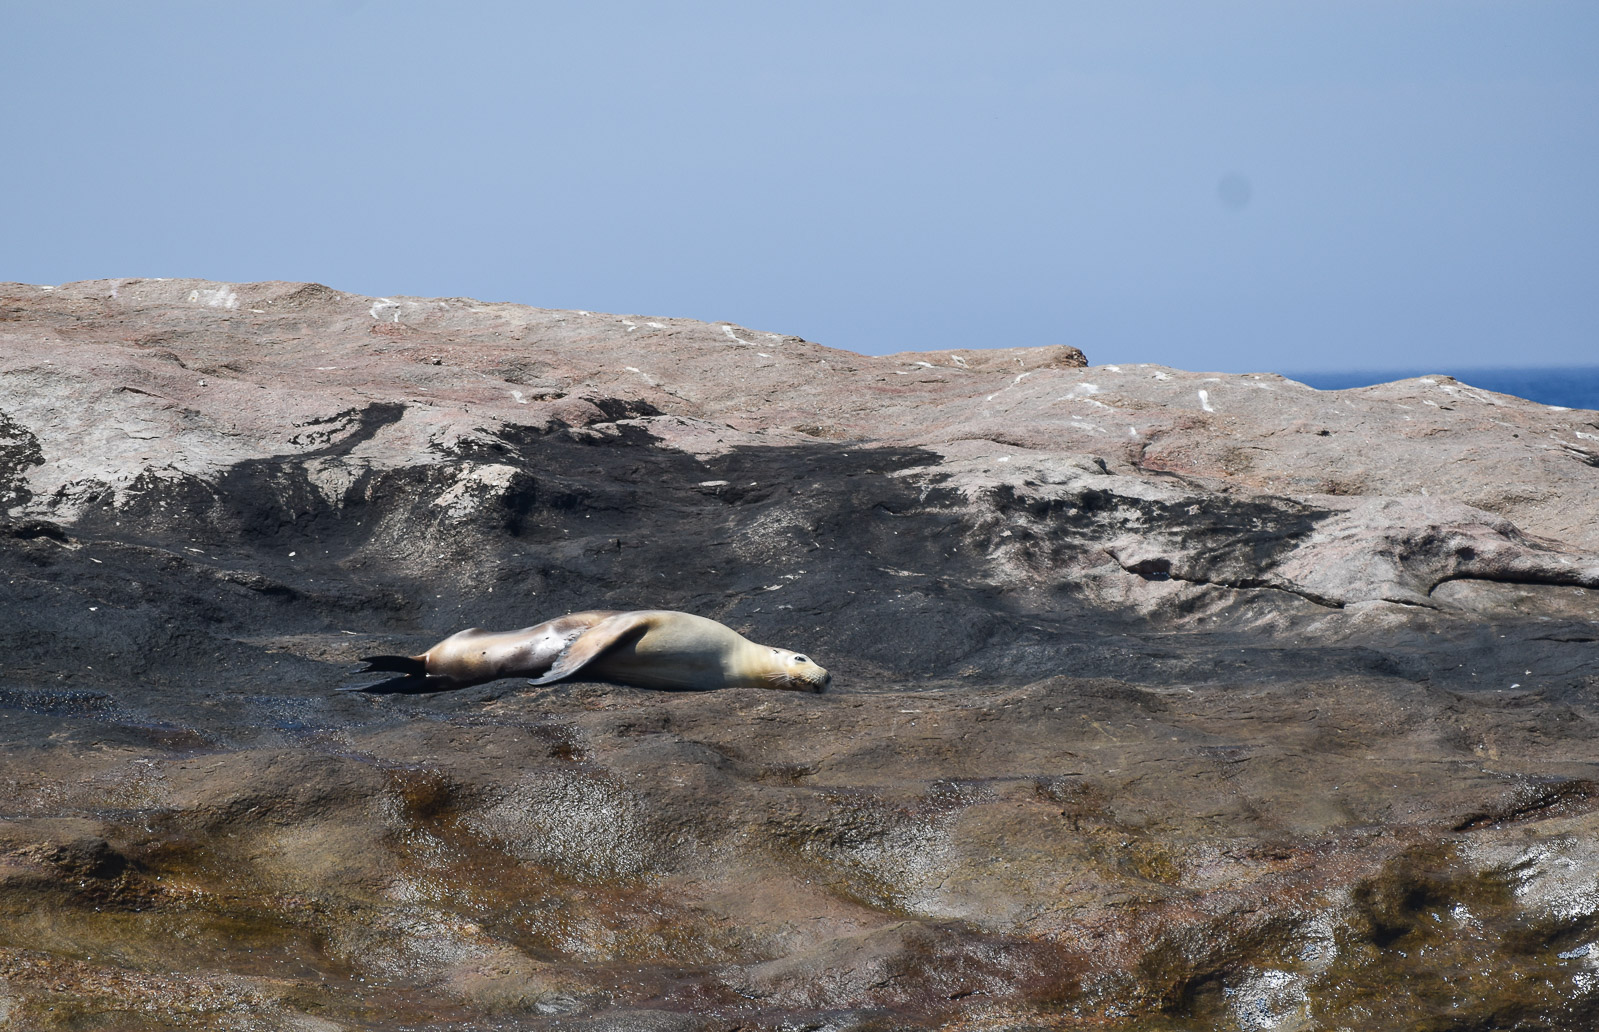 A sea lion relaxing on the rocks near Woody Island